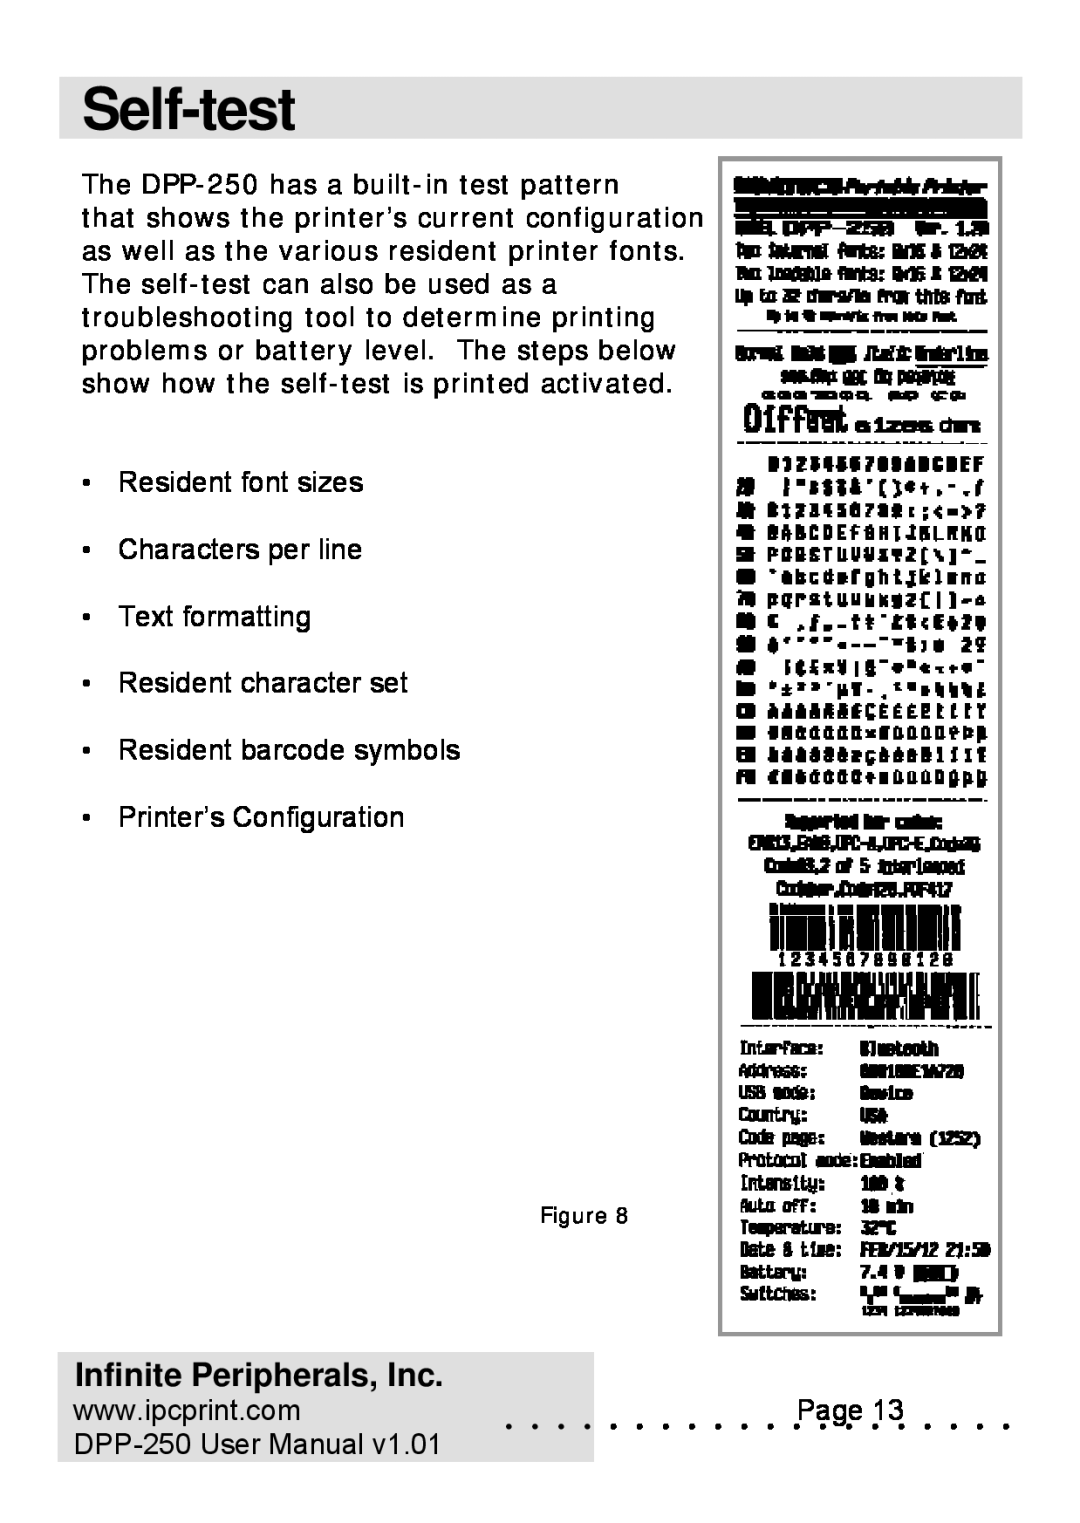 Infinite Peripherals DPP-250 Self-test, Resident font sizes Characters per line Text formatting, Printer’s Configuration 